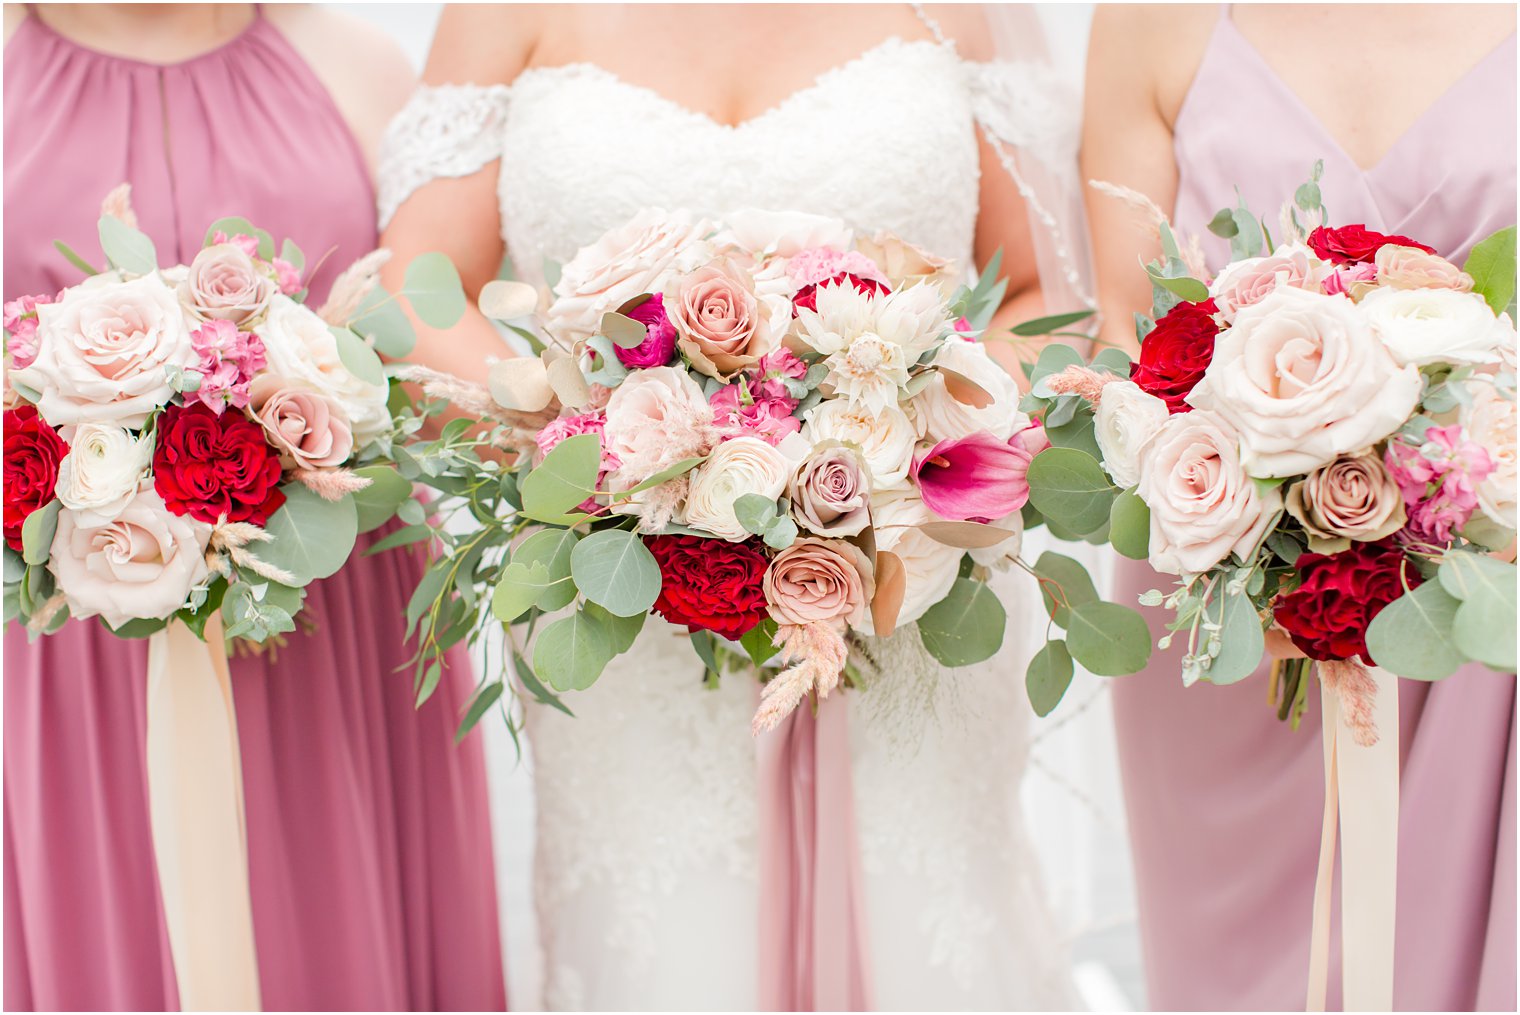 Pink, ivory, and red wedding bouquets by Narcissus Florals